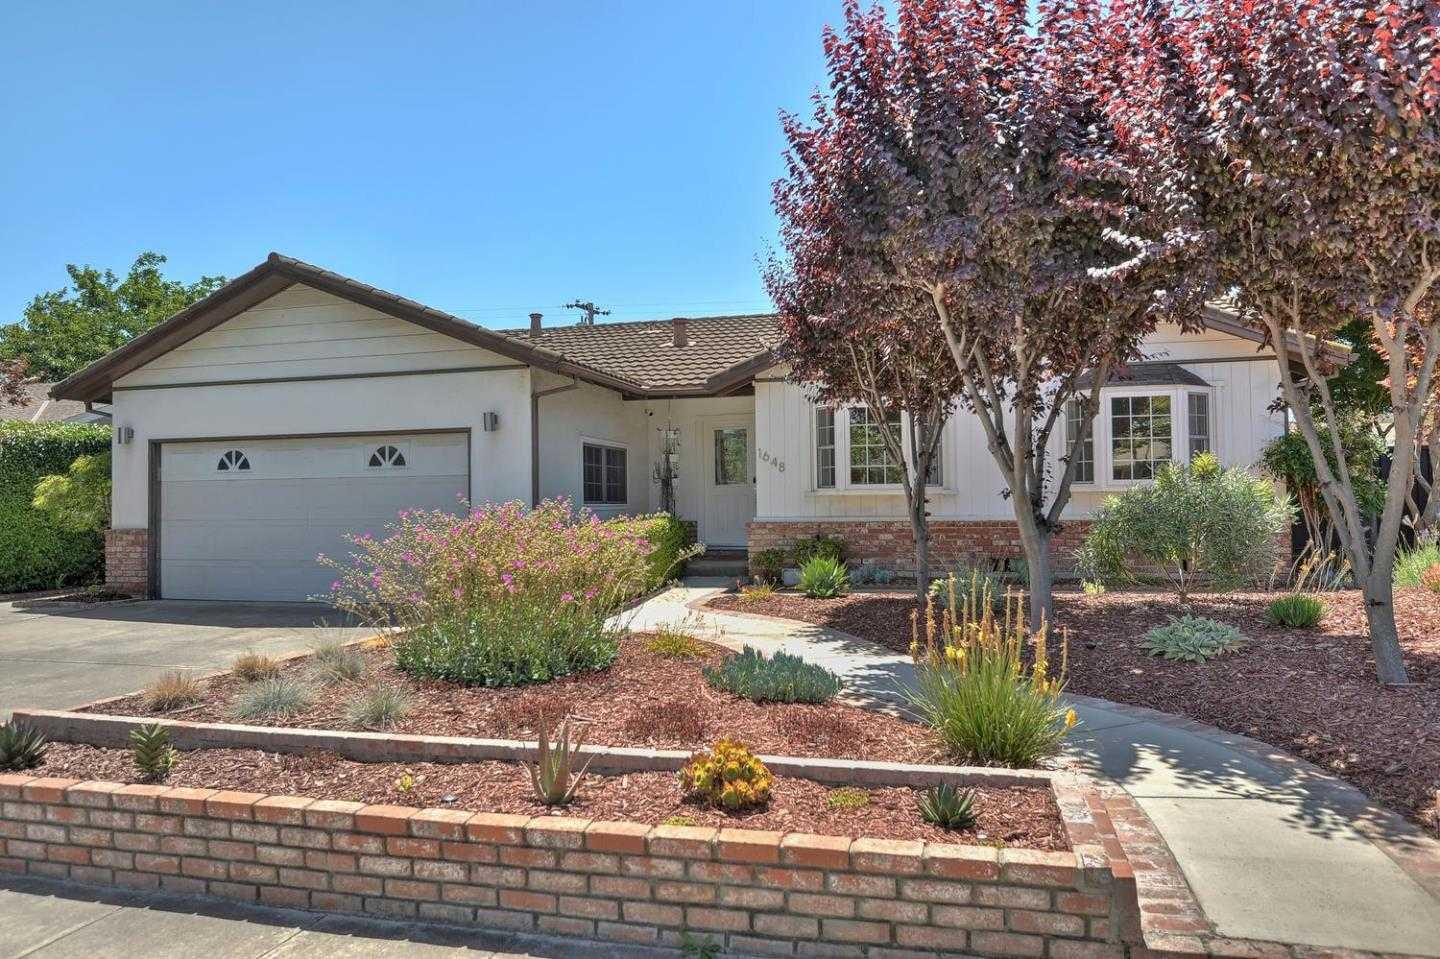 1648 Willowmont AVE, SAN JOSE, Single Family Home,  sold, Kristen Constantino, Realty World - San Jose Realty